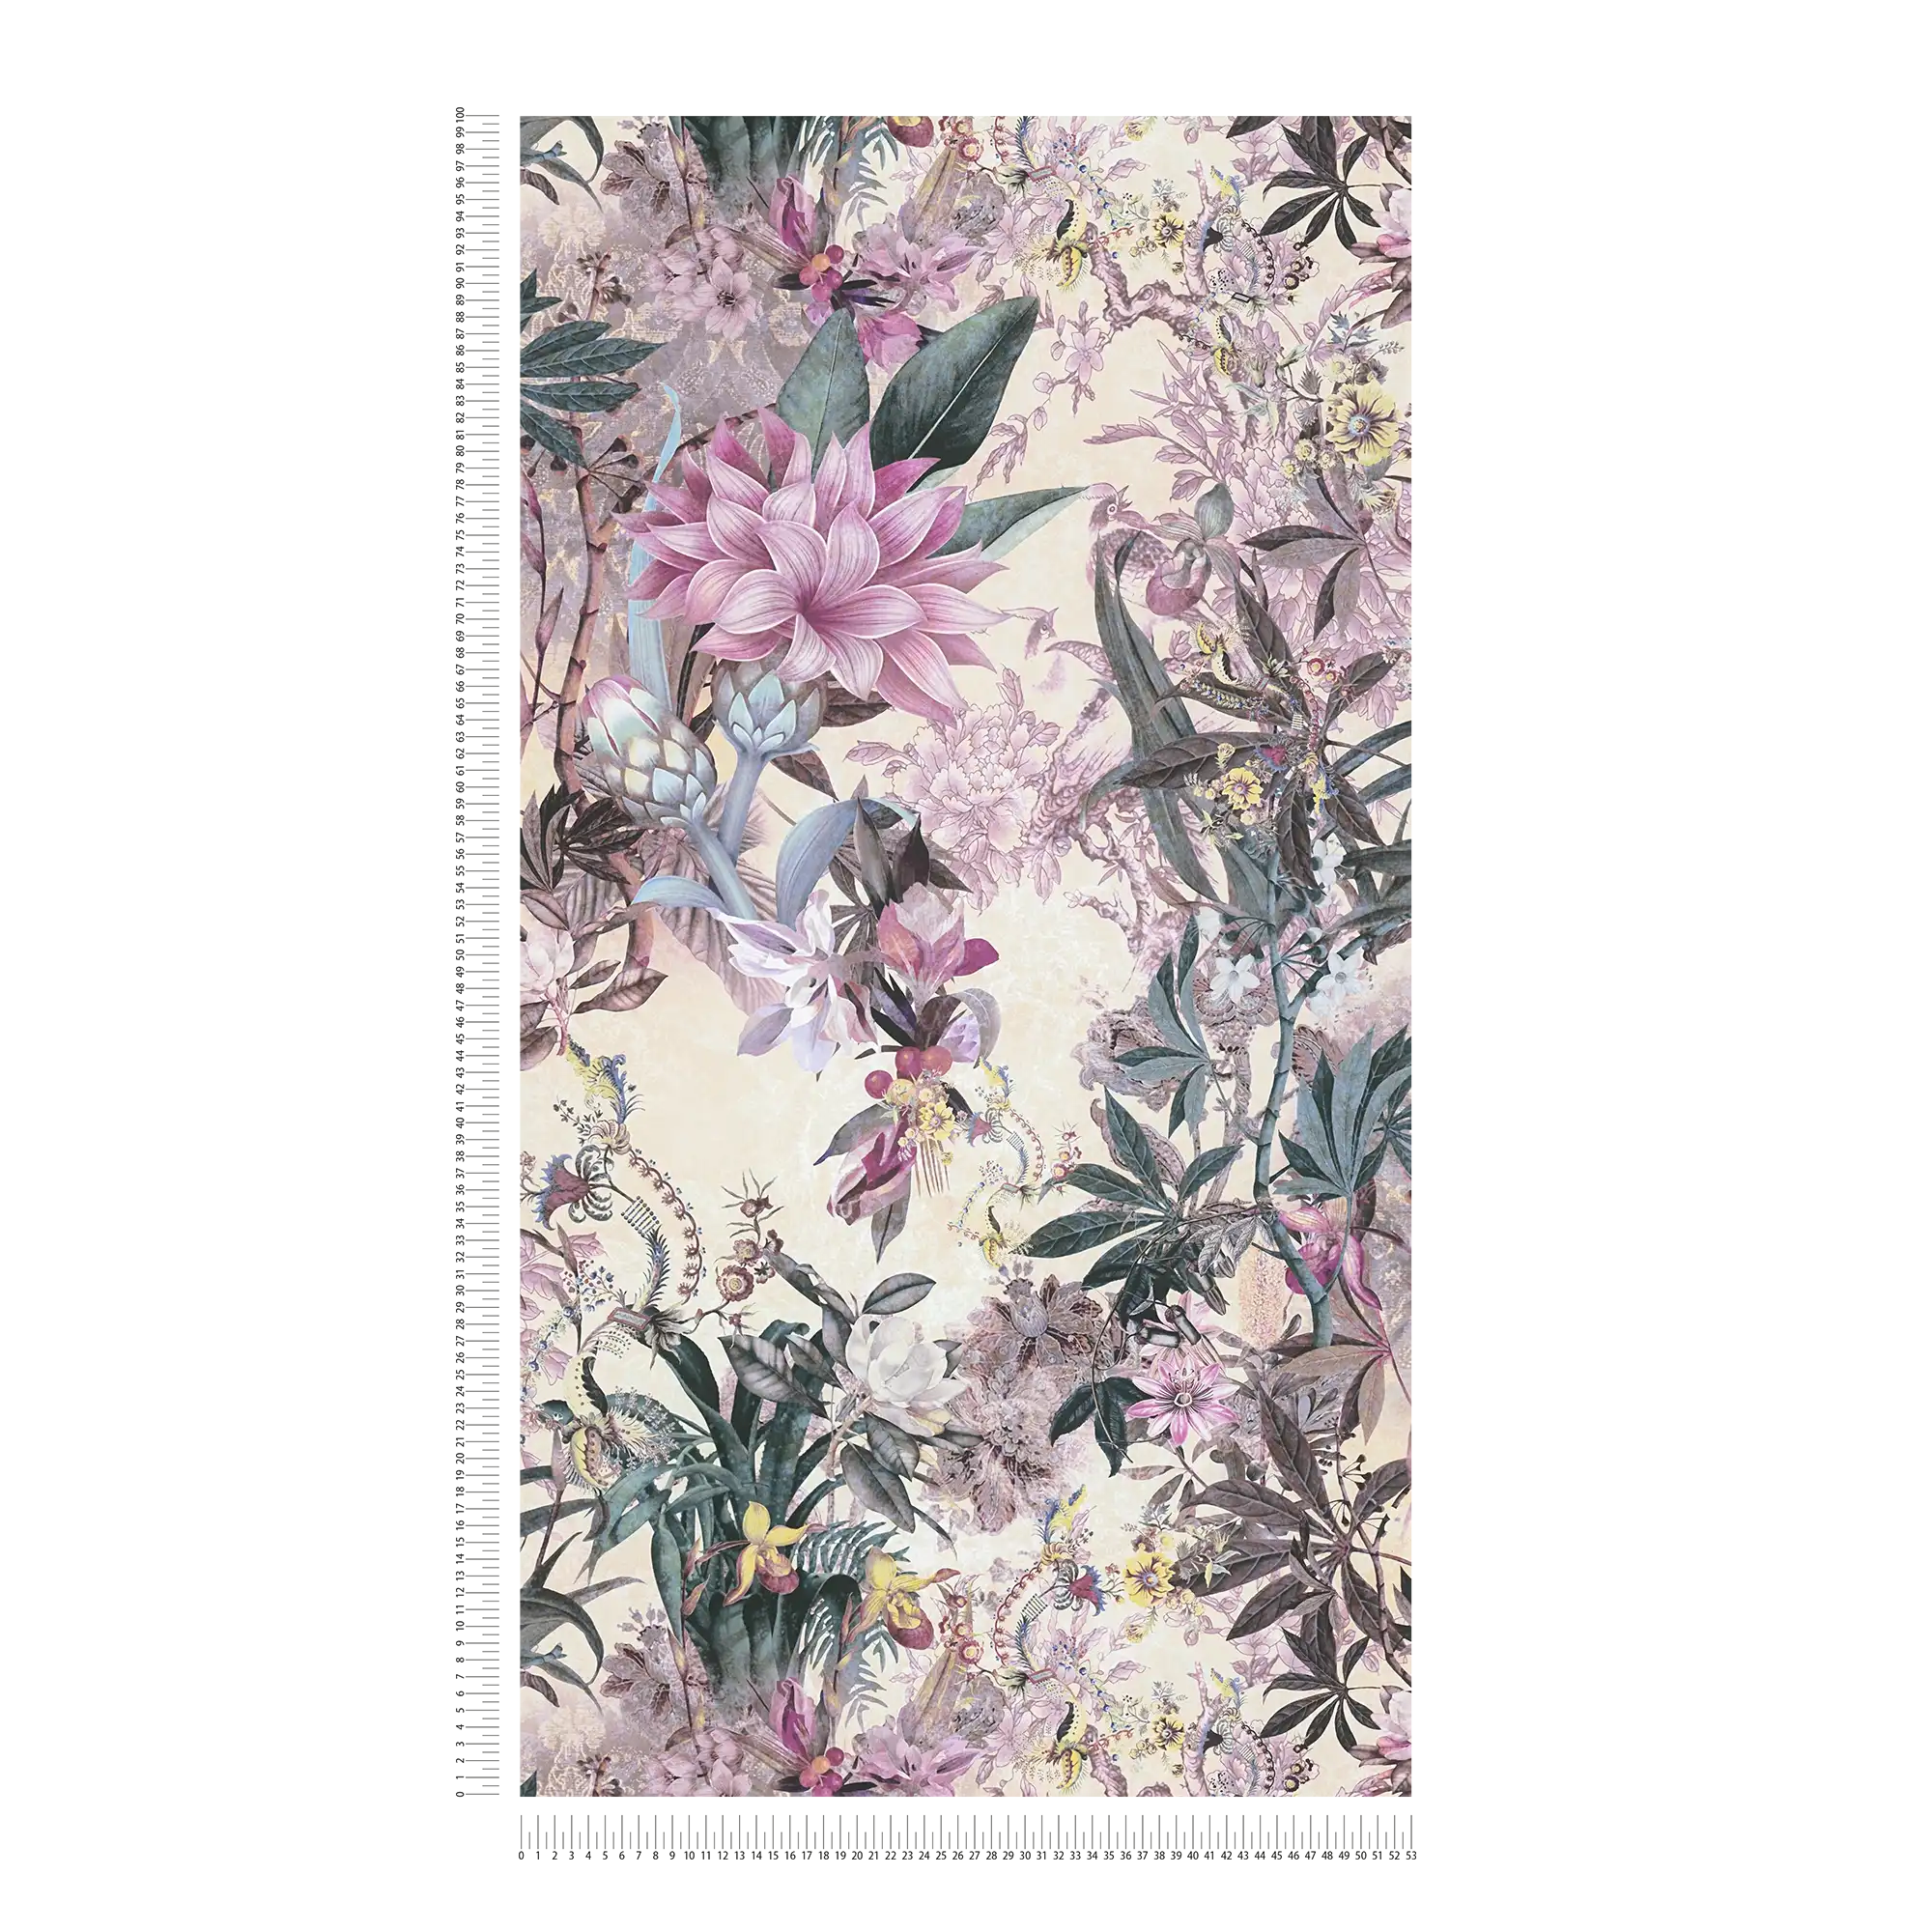             Floral wallpaper modern colonial style - pink, green
        